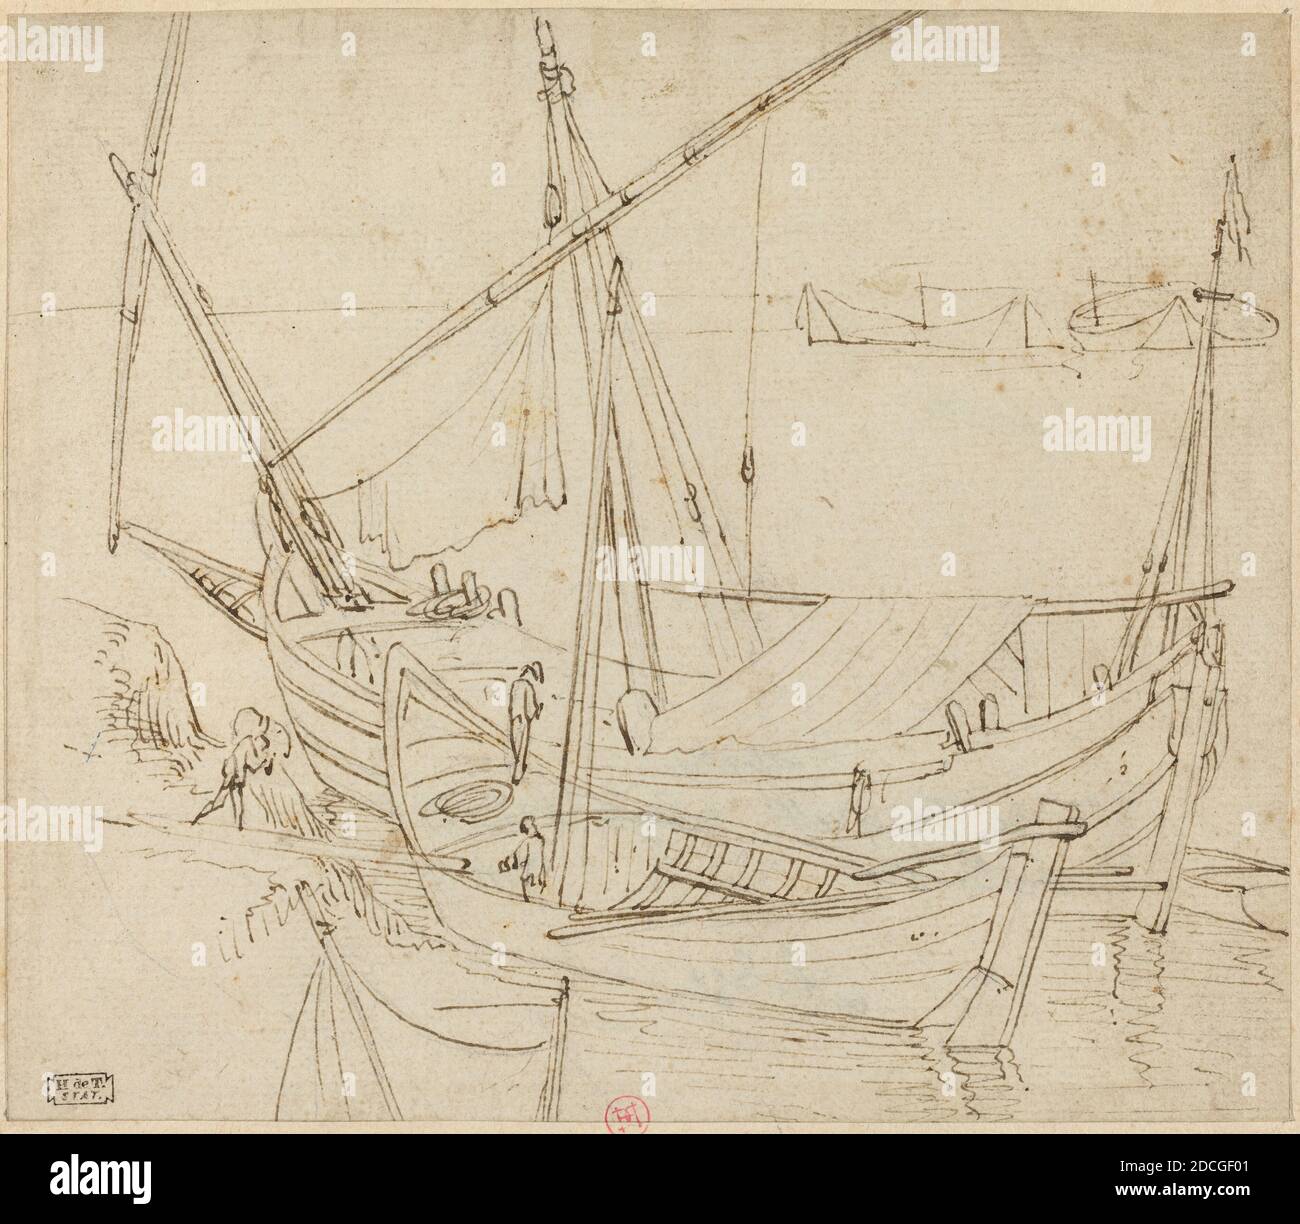 Anonymous Artist, (artist), Agostino Tassi, (related artist), Italian, 1565 - 1644, Boats, pen an brown ink on laid paper, Overall (approximate): 15.4 x 17.7 cm (6 1/16 x 6 15/16 in.), support: 21.8 x 20.5 cm (8 9/16 x 8 1/16 in Stock Photo